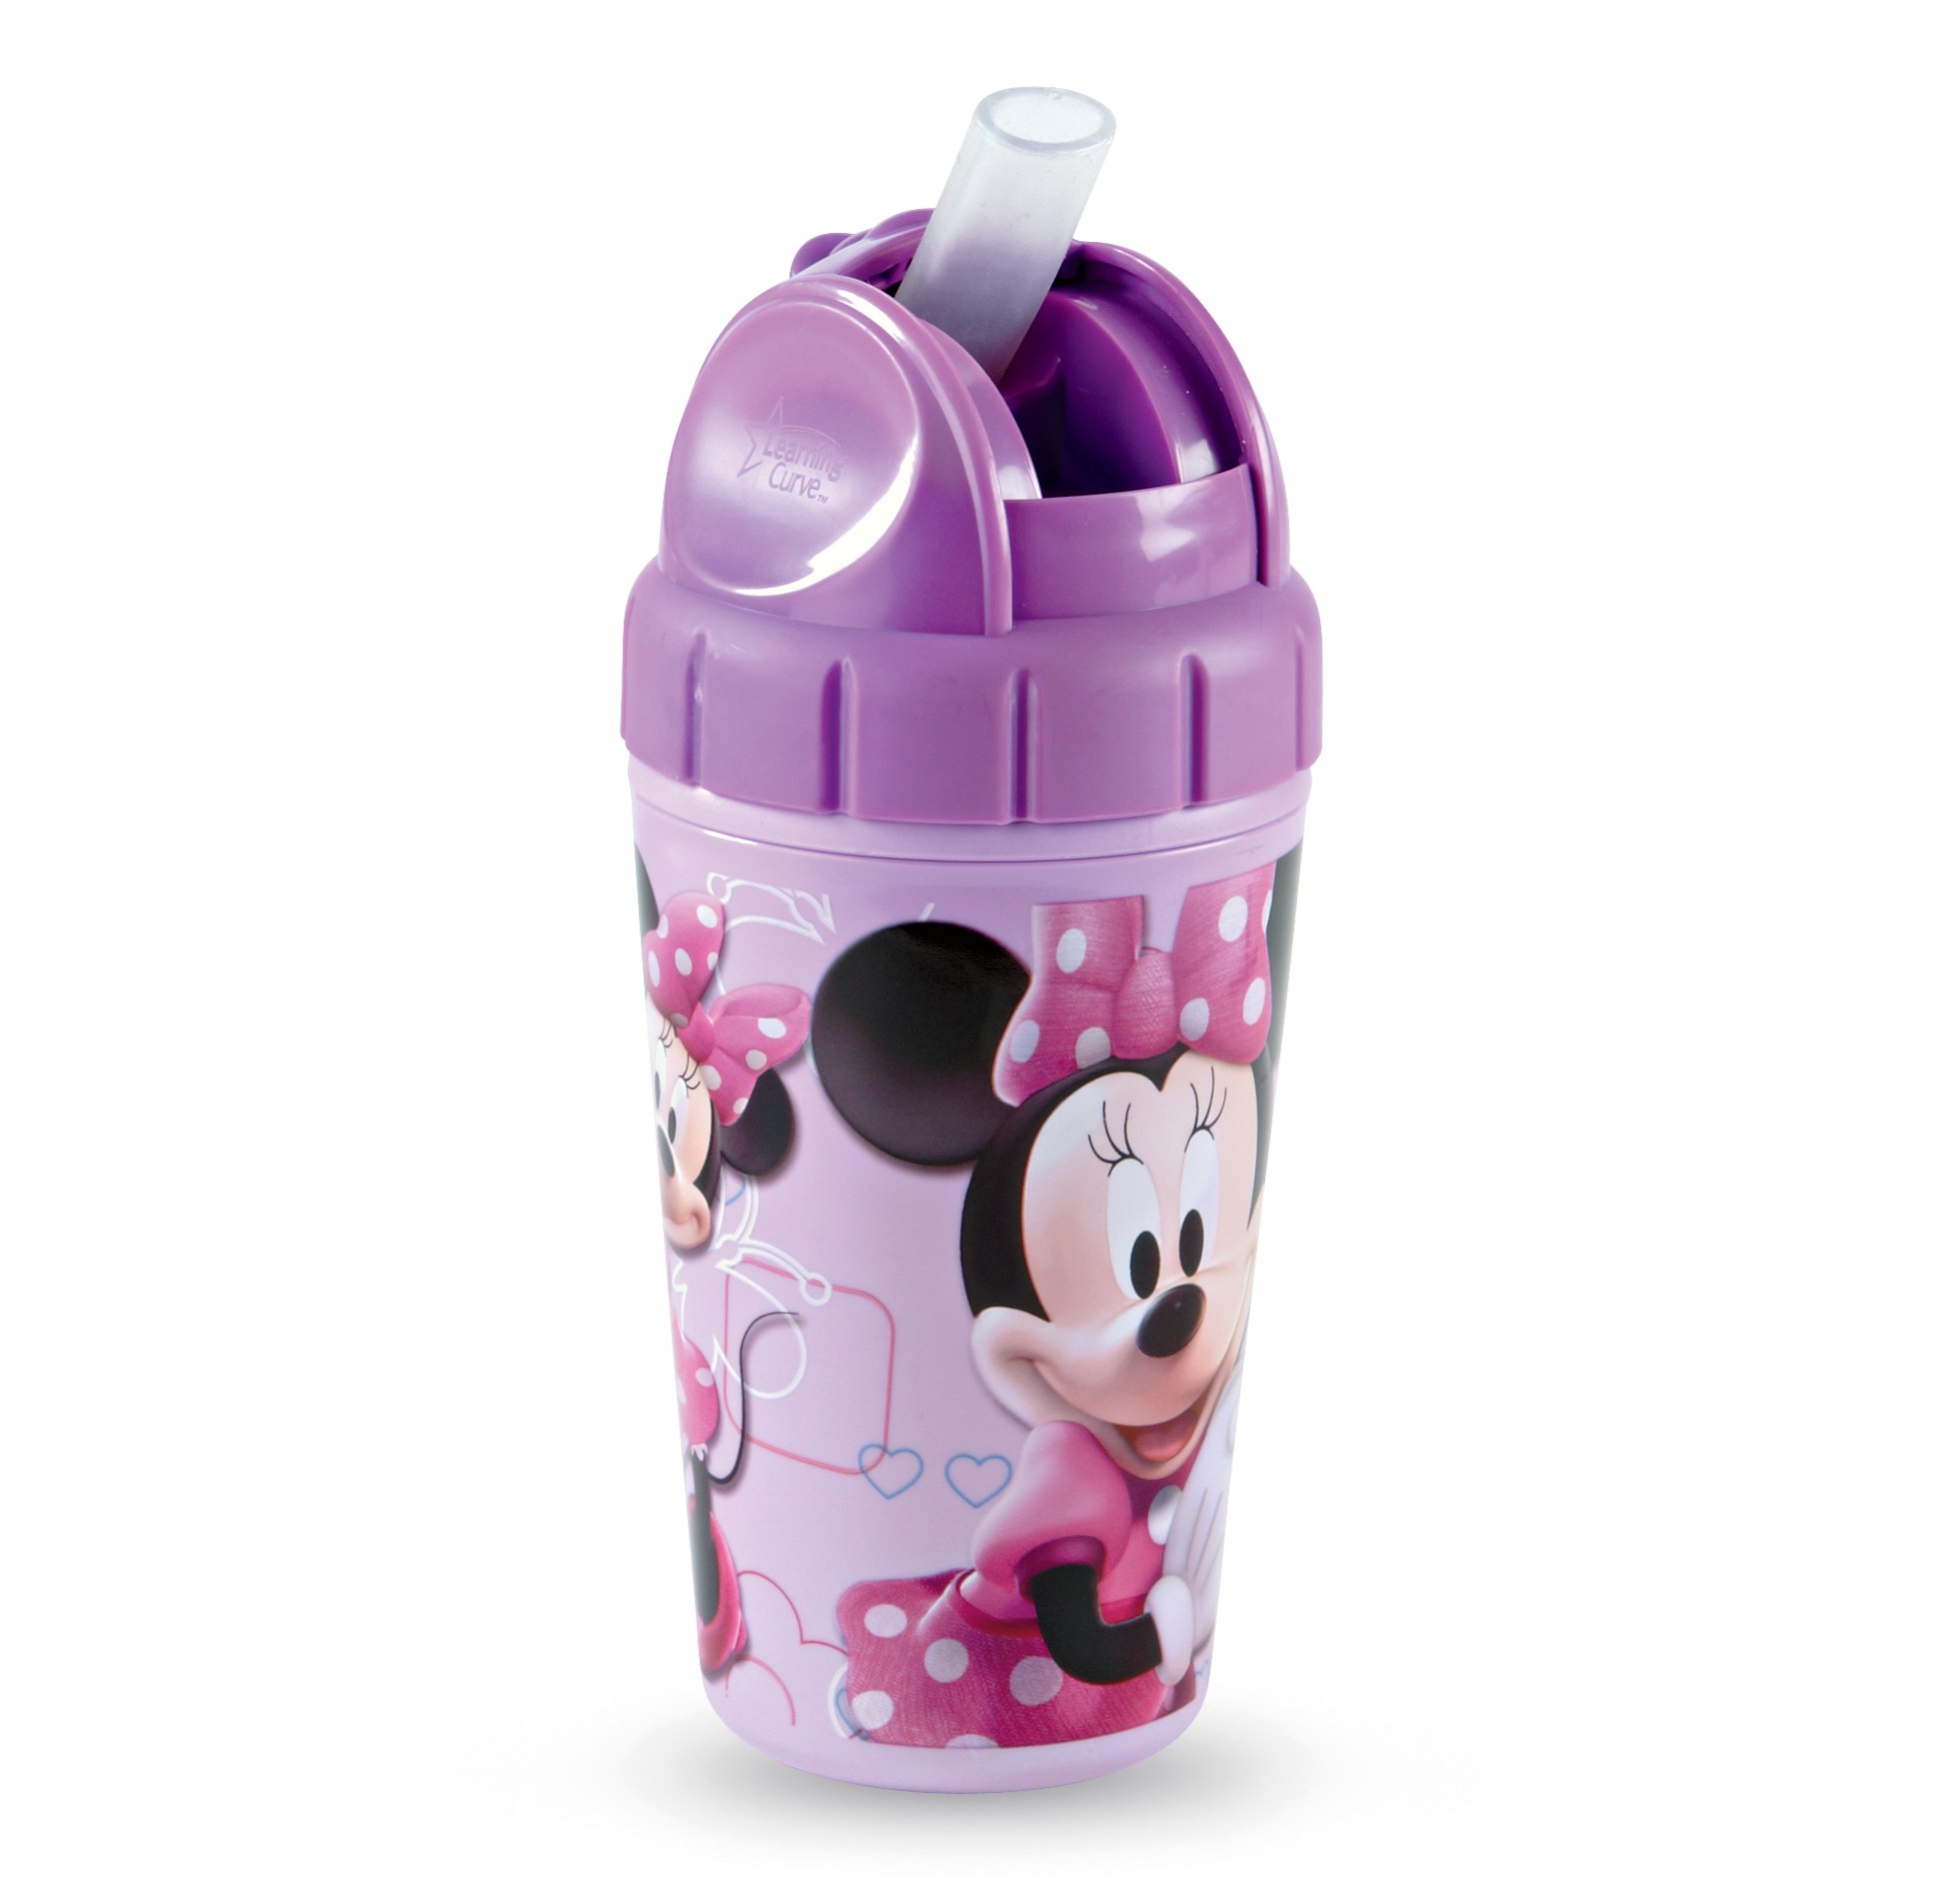 0071463101955 - MINNIE MOUSE INSULATED STRAW CUP 9OZ 1 PACK